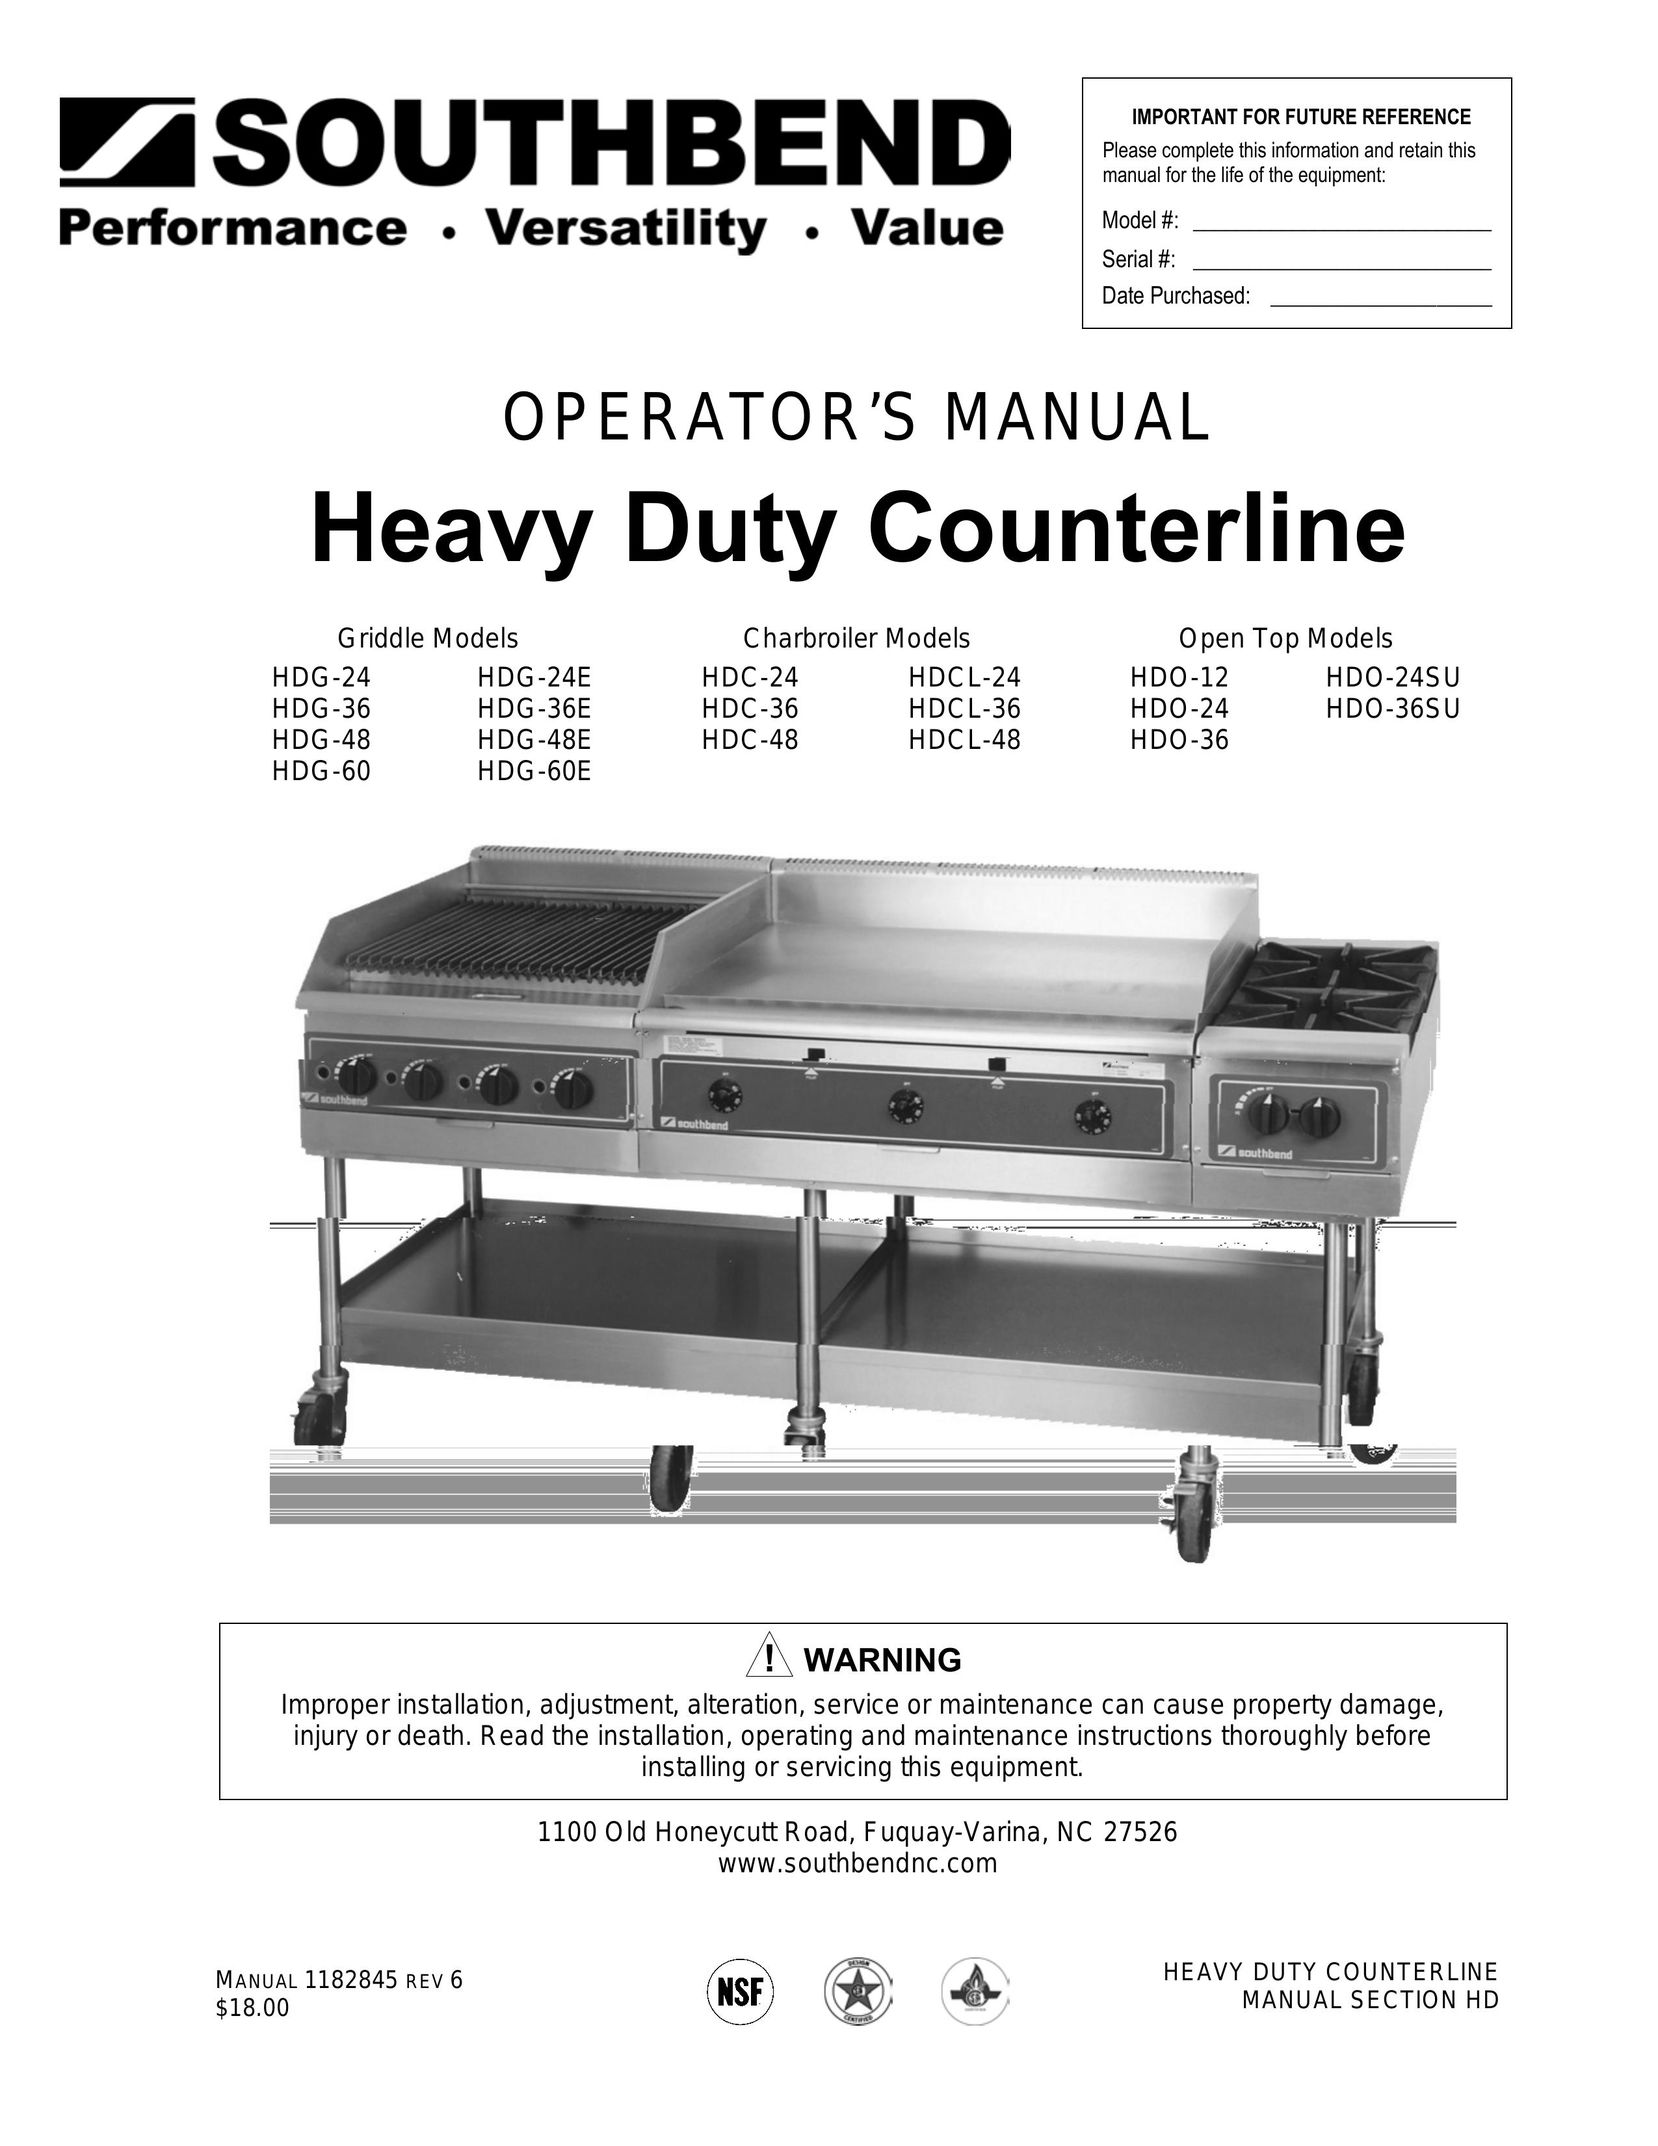 Southbend HDO-36 Cooktop User Manual